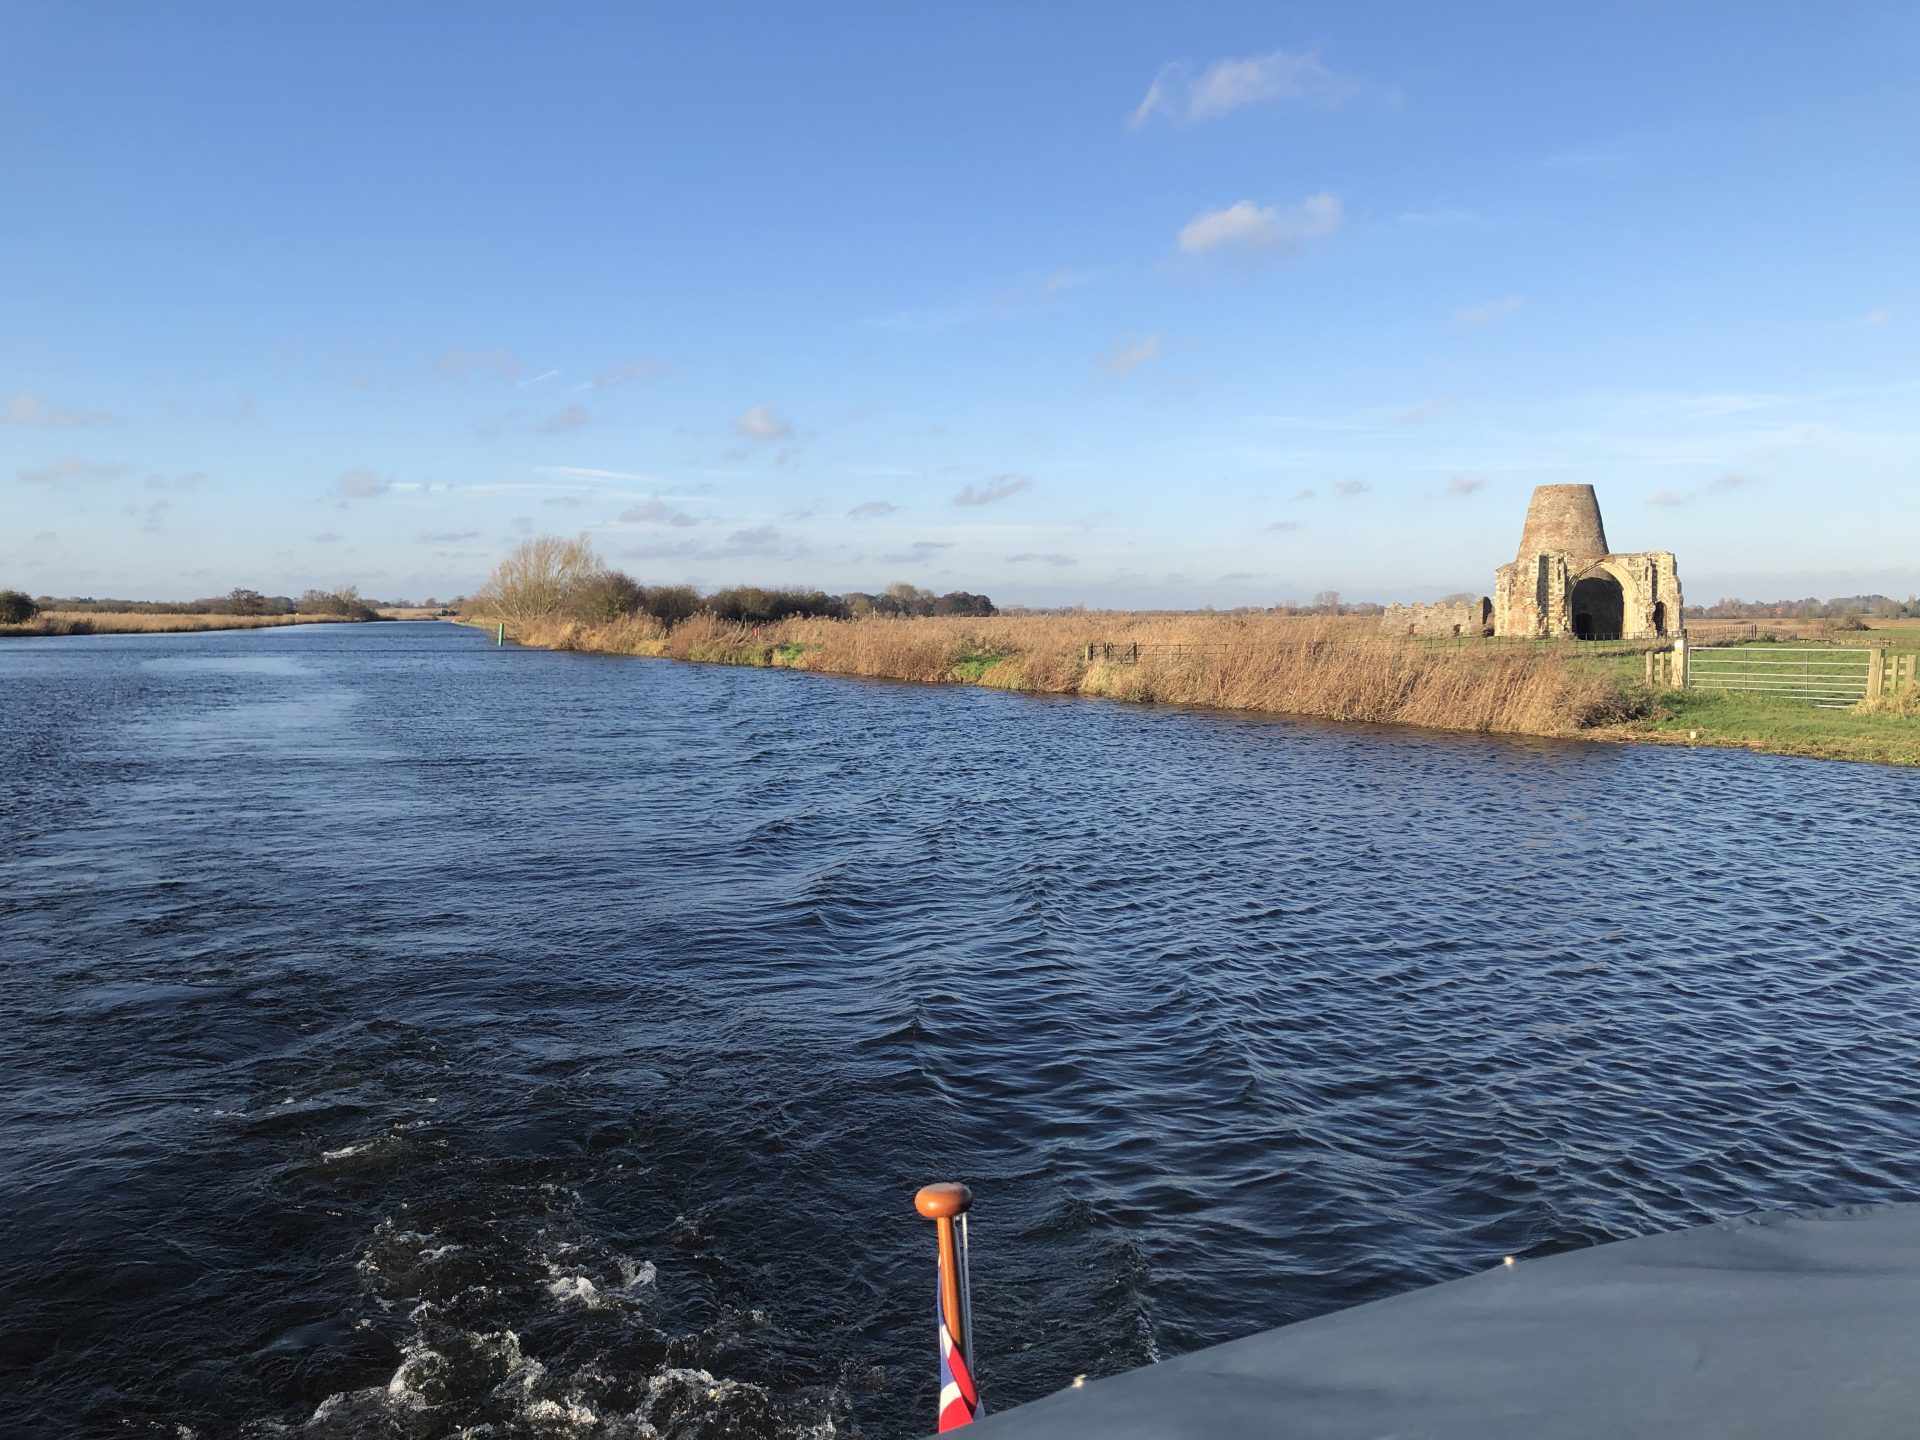 Passing St Benets on the way to the River Thurne